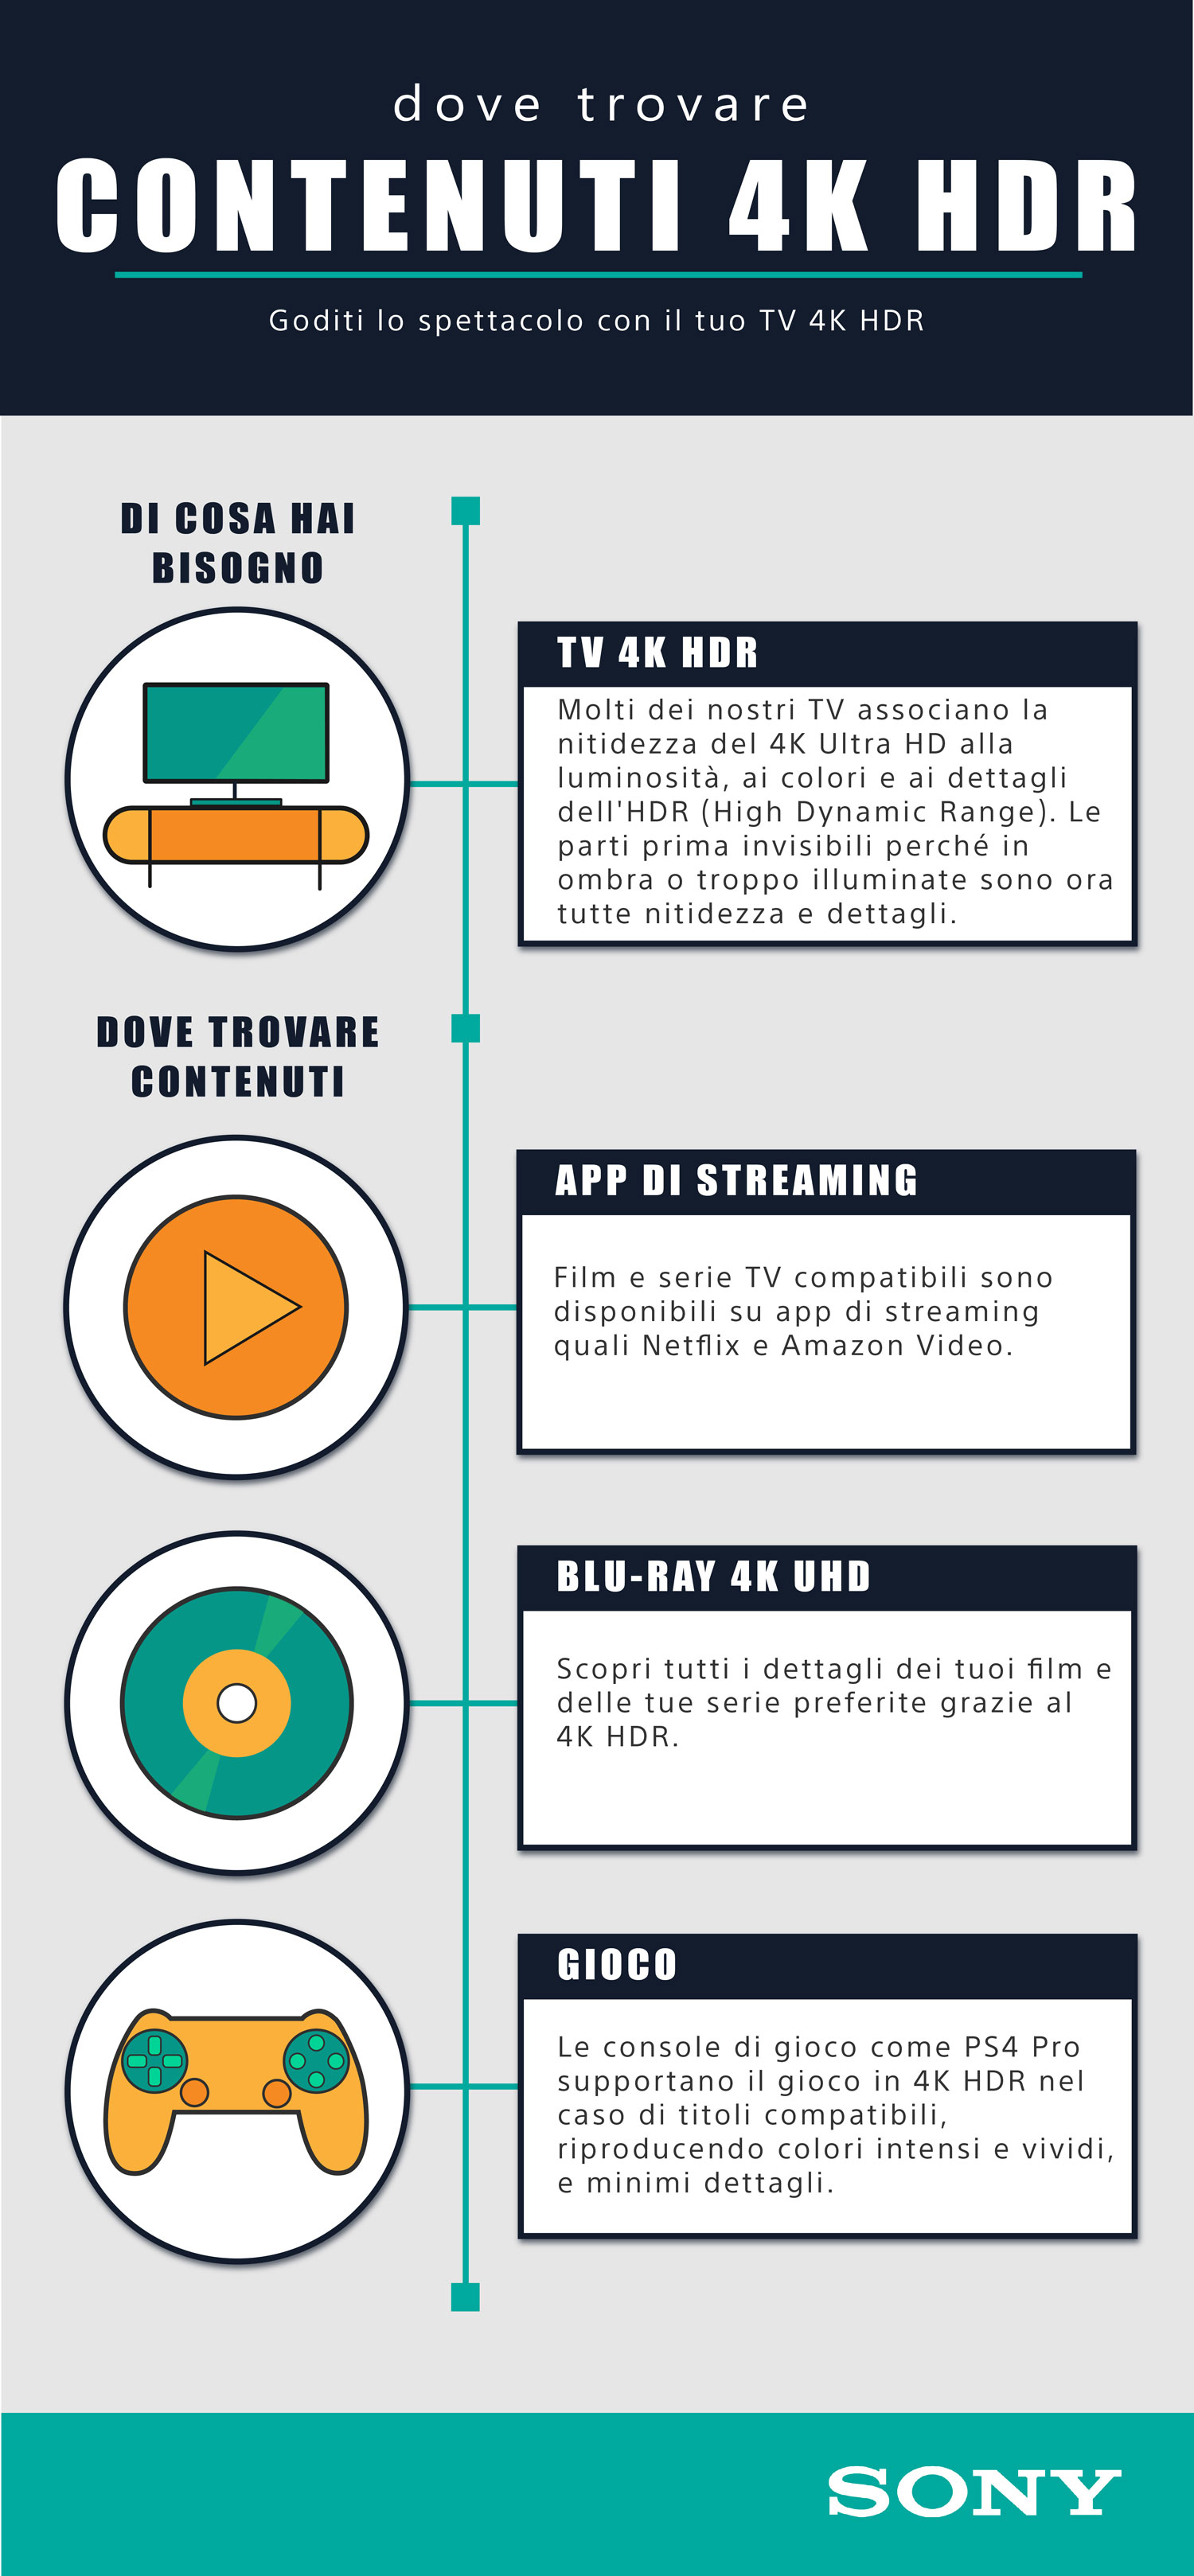 Where-to-Find-4K-HDR-Content-Infographic-ITALIAN.jpg